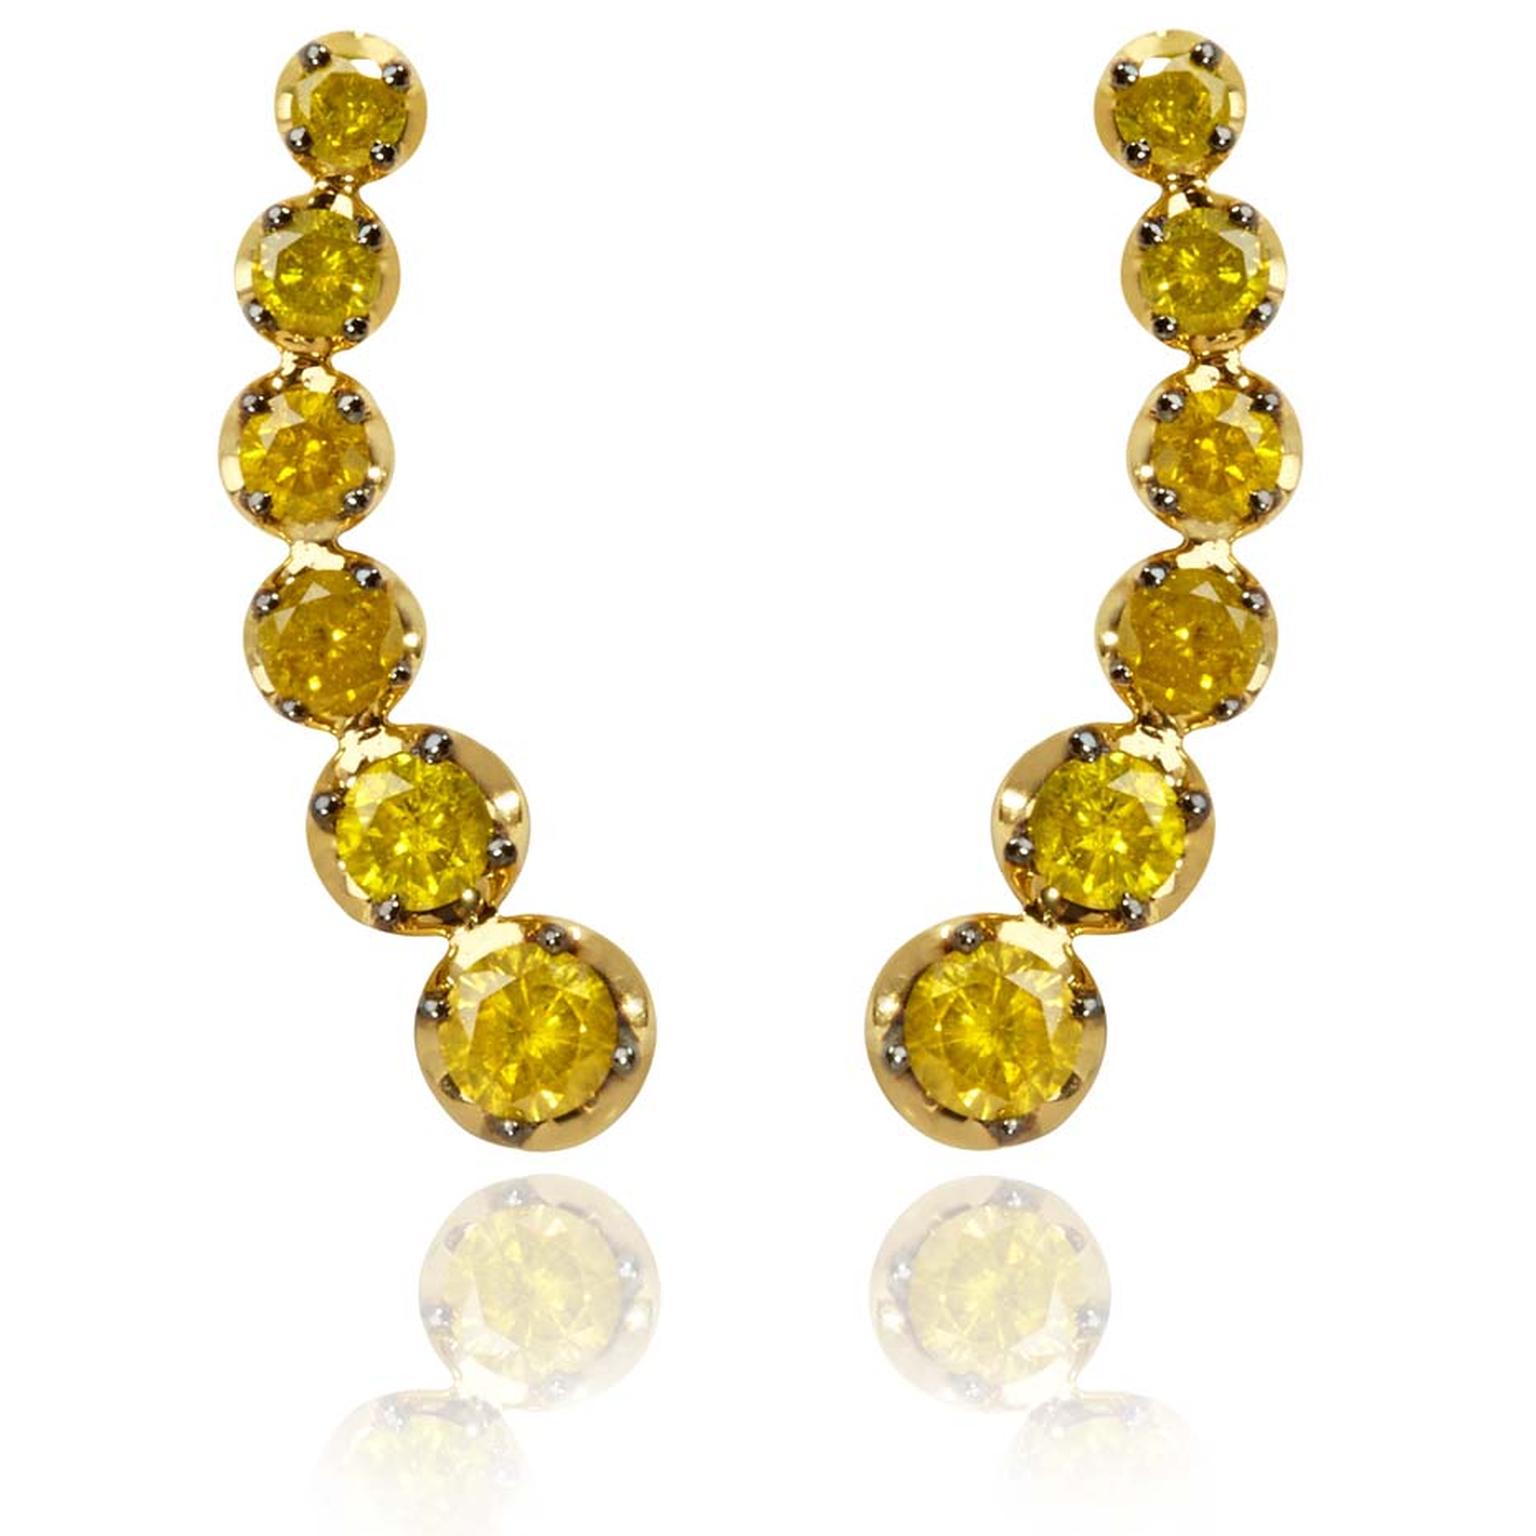 Annoushka Dusty Diamonds ear pins in yellow gold, set with six yellow diamonds in descending order, can be positioned on the ear in various different ways (£1,590; can be bought seperately).